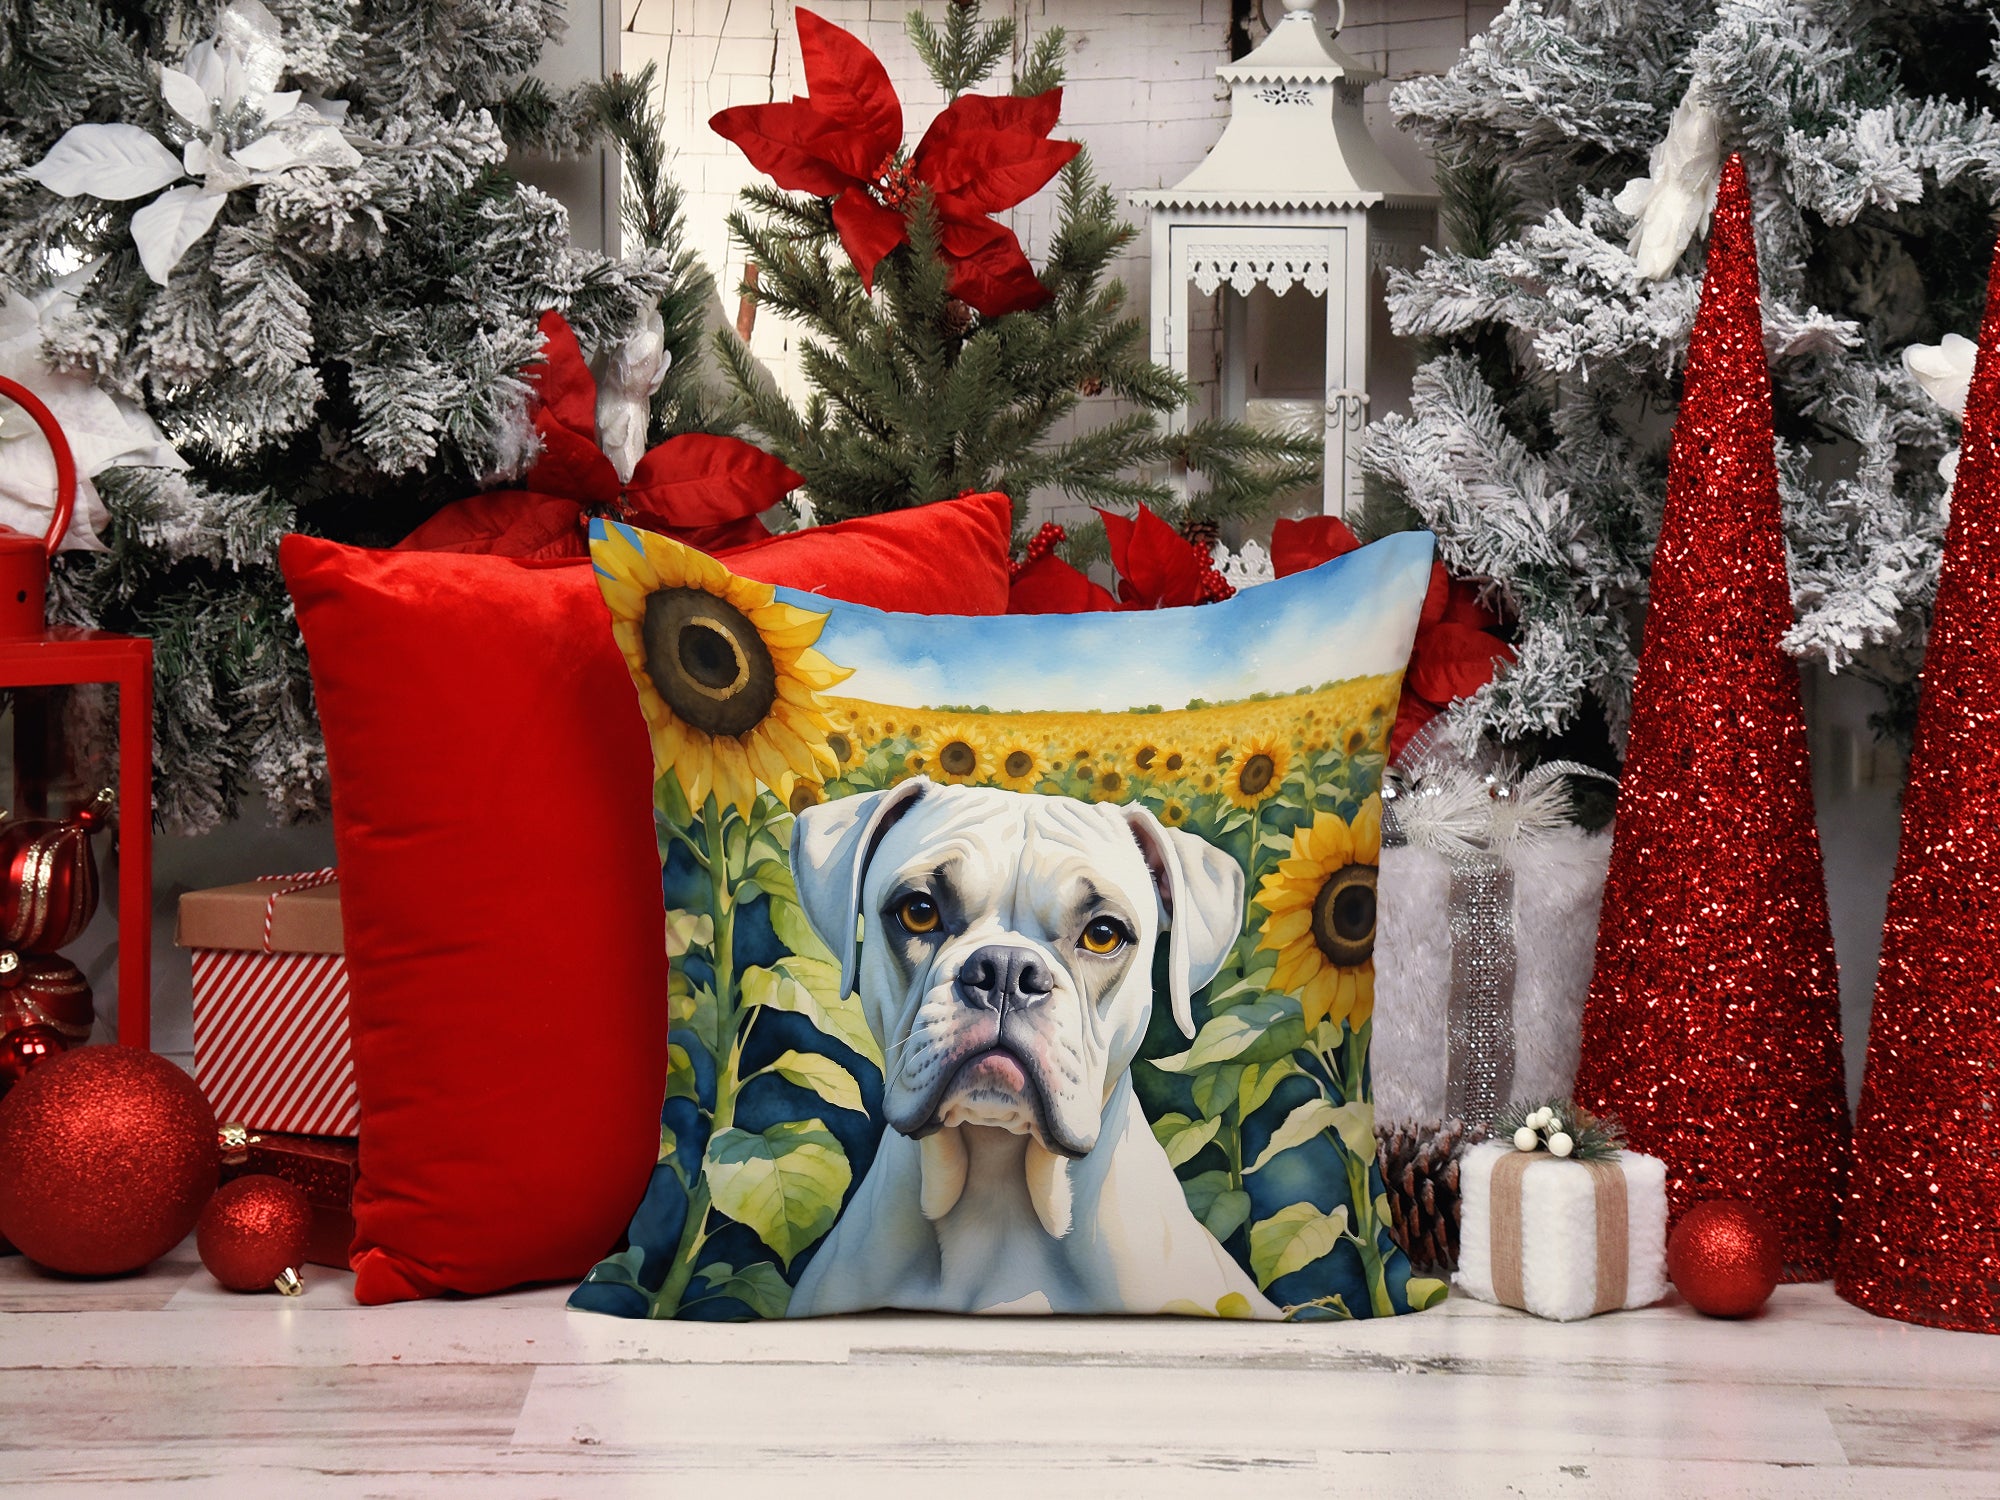 Boxer in Sunflowers Throw Pillow